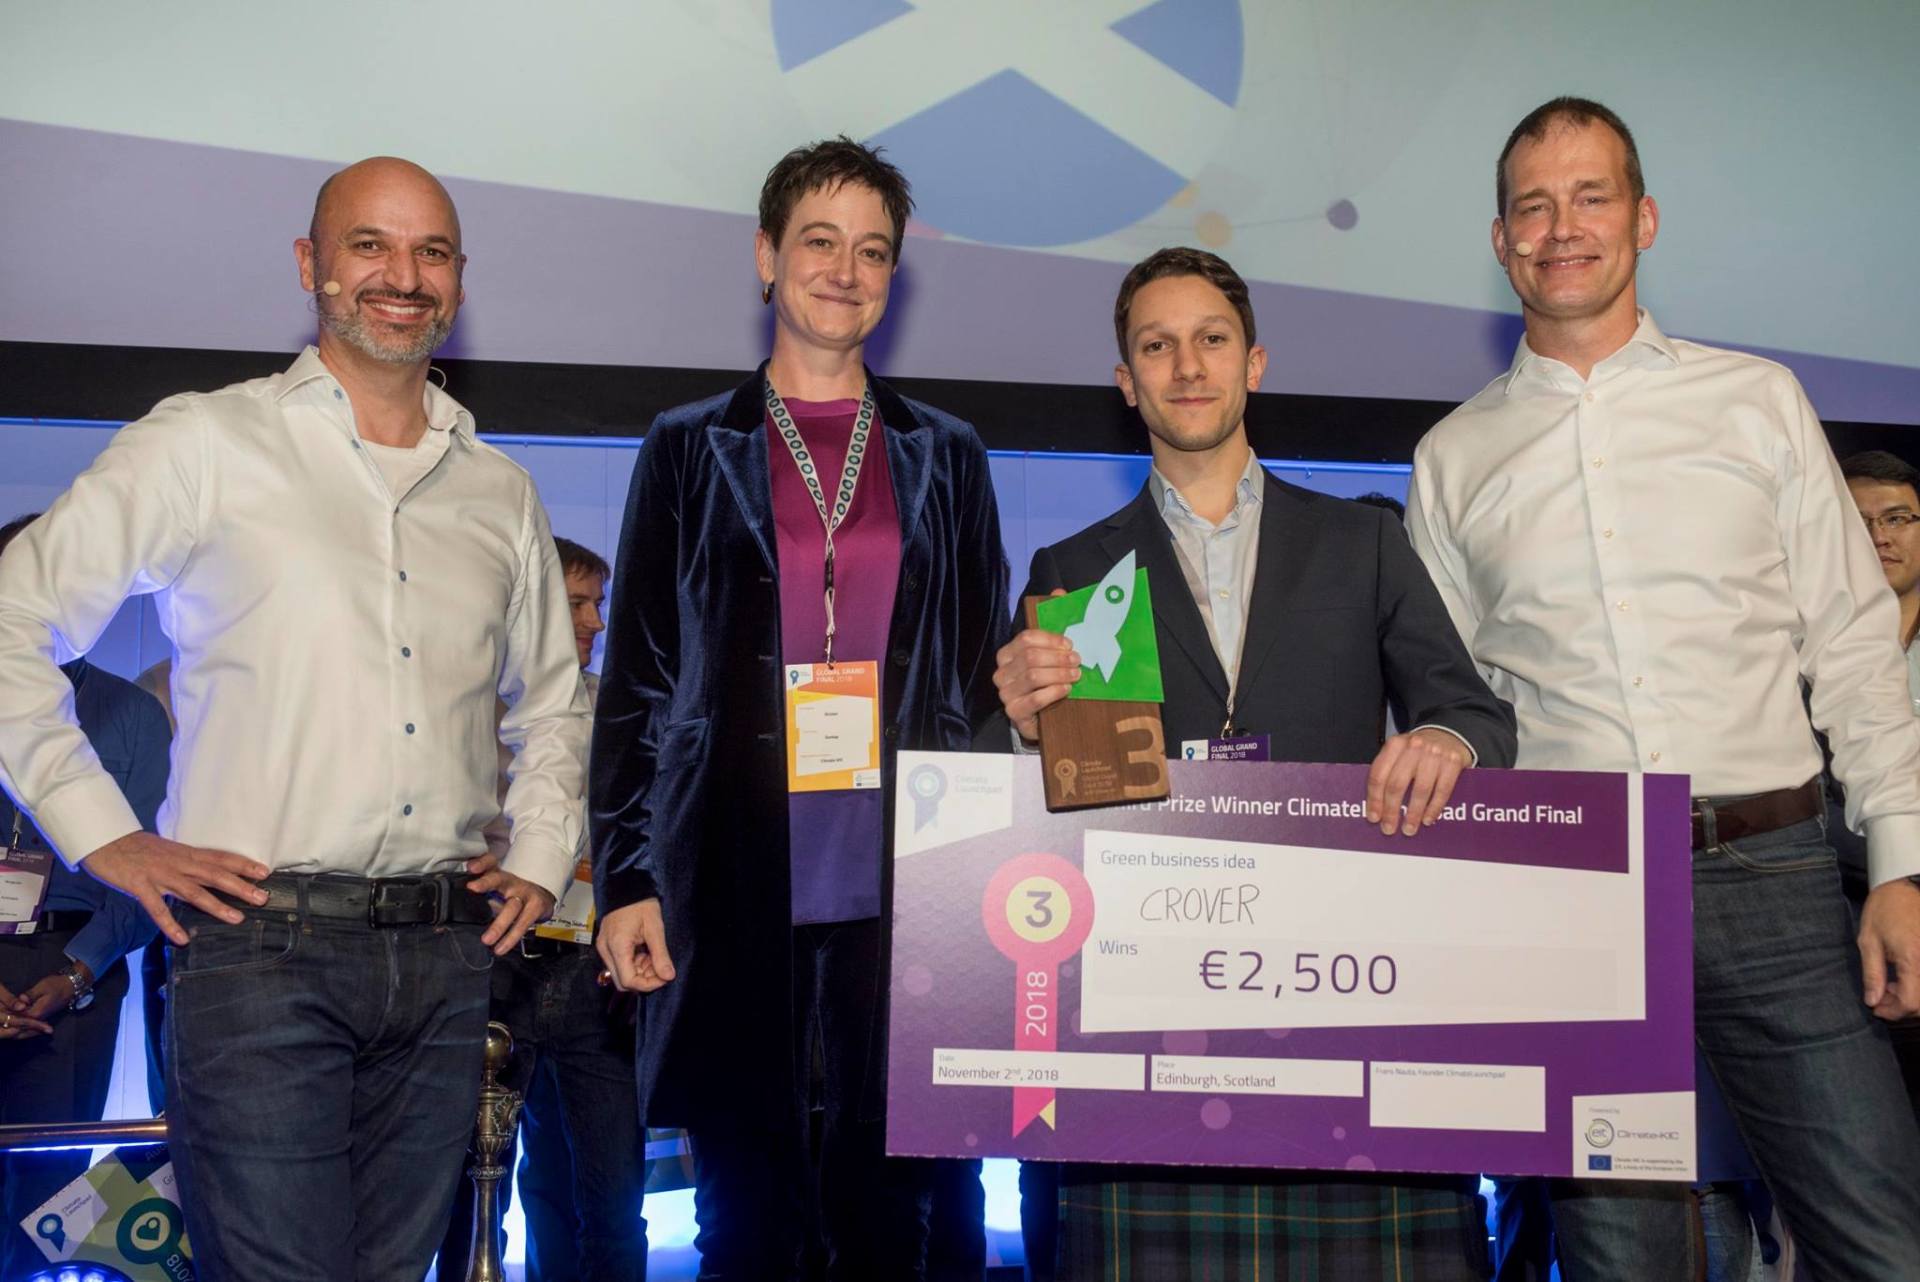 Crover receiving prize. From left to right: Hans Westerhof (Project Lead - ClimateLaunchpad), Kirsten Dunlop (CEO - ClimateKIC), Lorenzo Conti (Founder - Crover Ltd), Frans Nauta (Project Lead - ClimateLaunchpad)